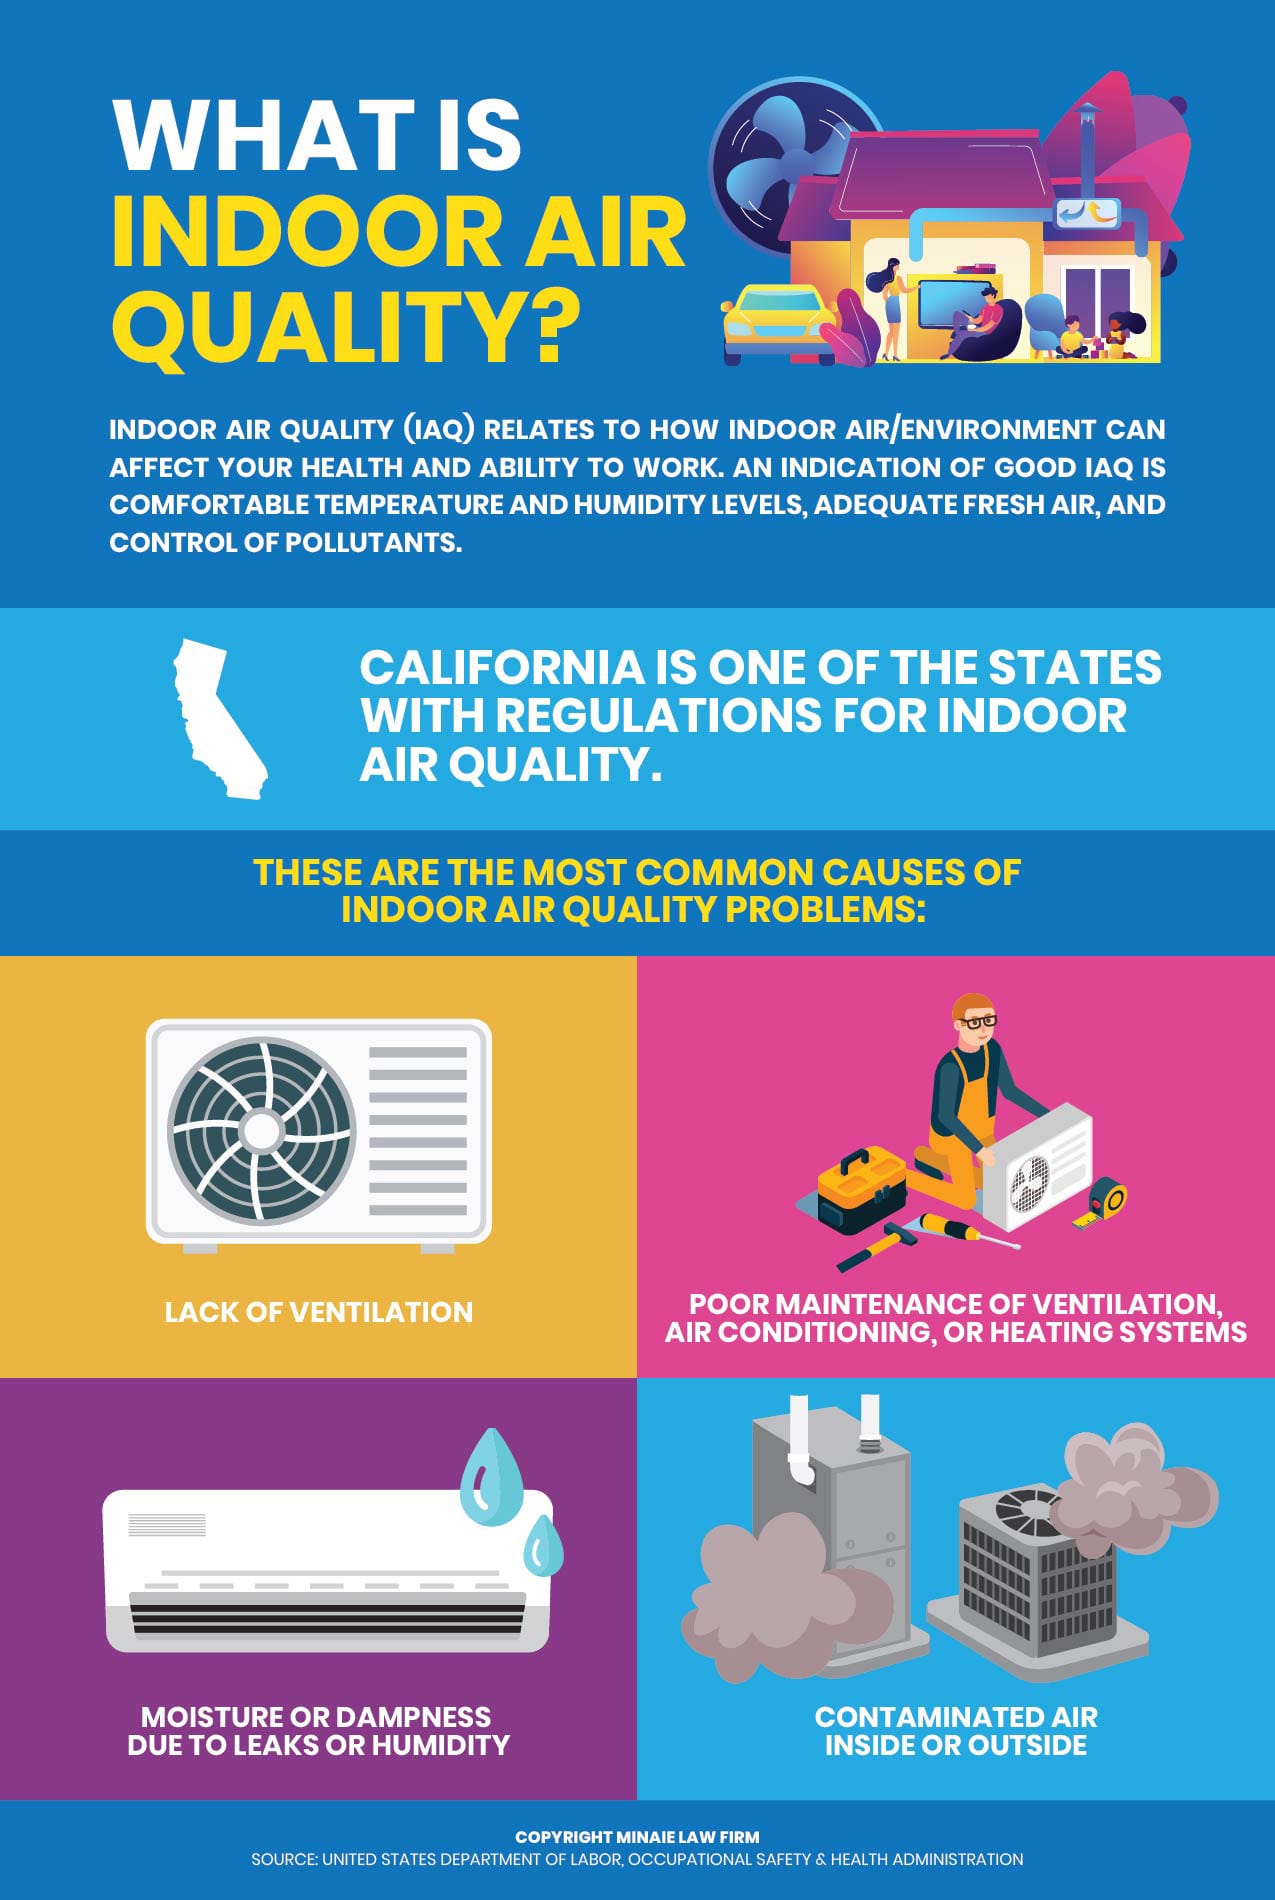 indoor air quality testing - an infographic about indoor air quality in CA